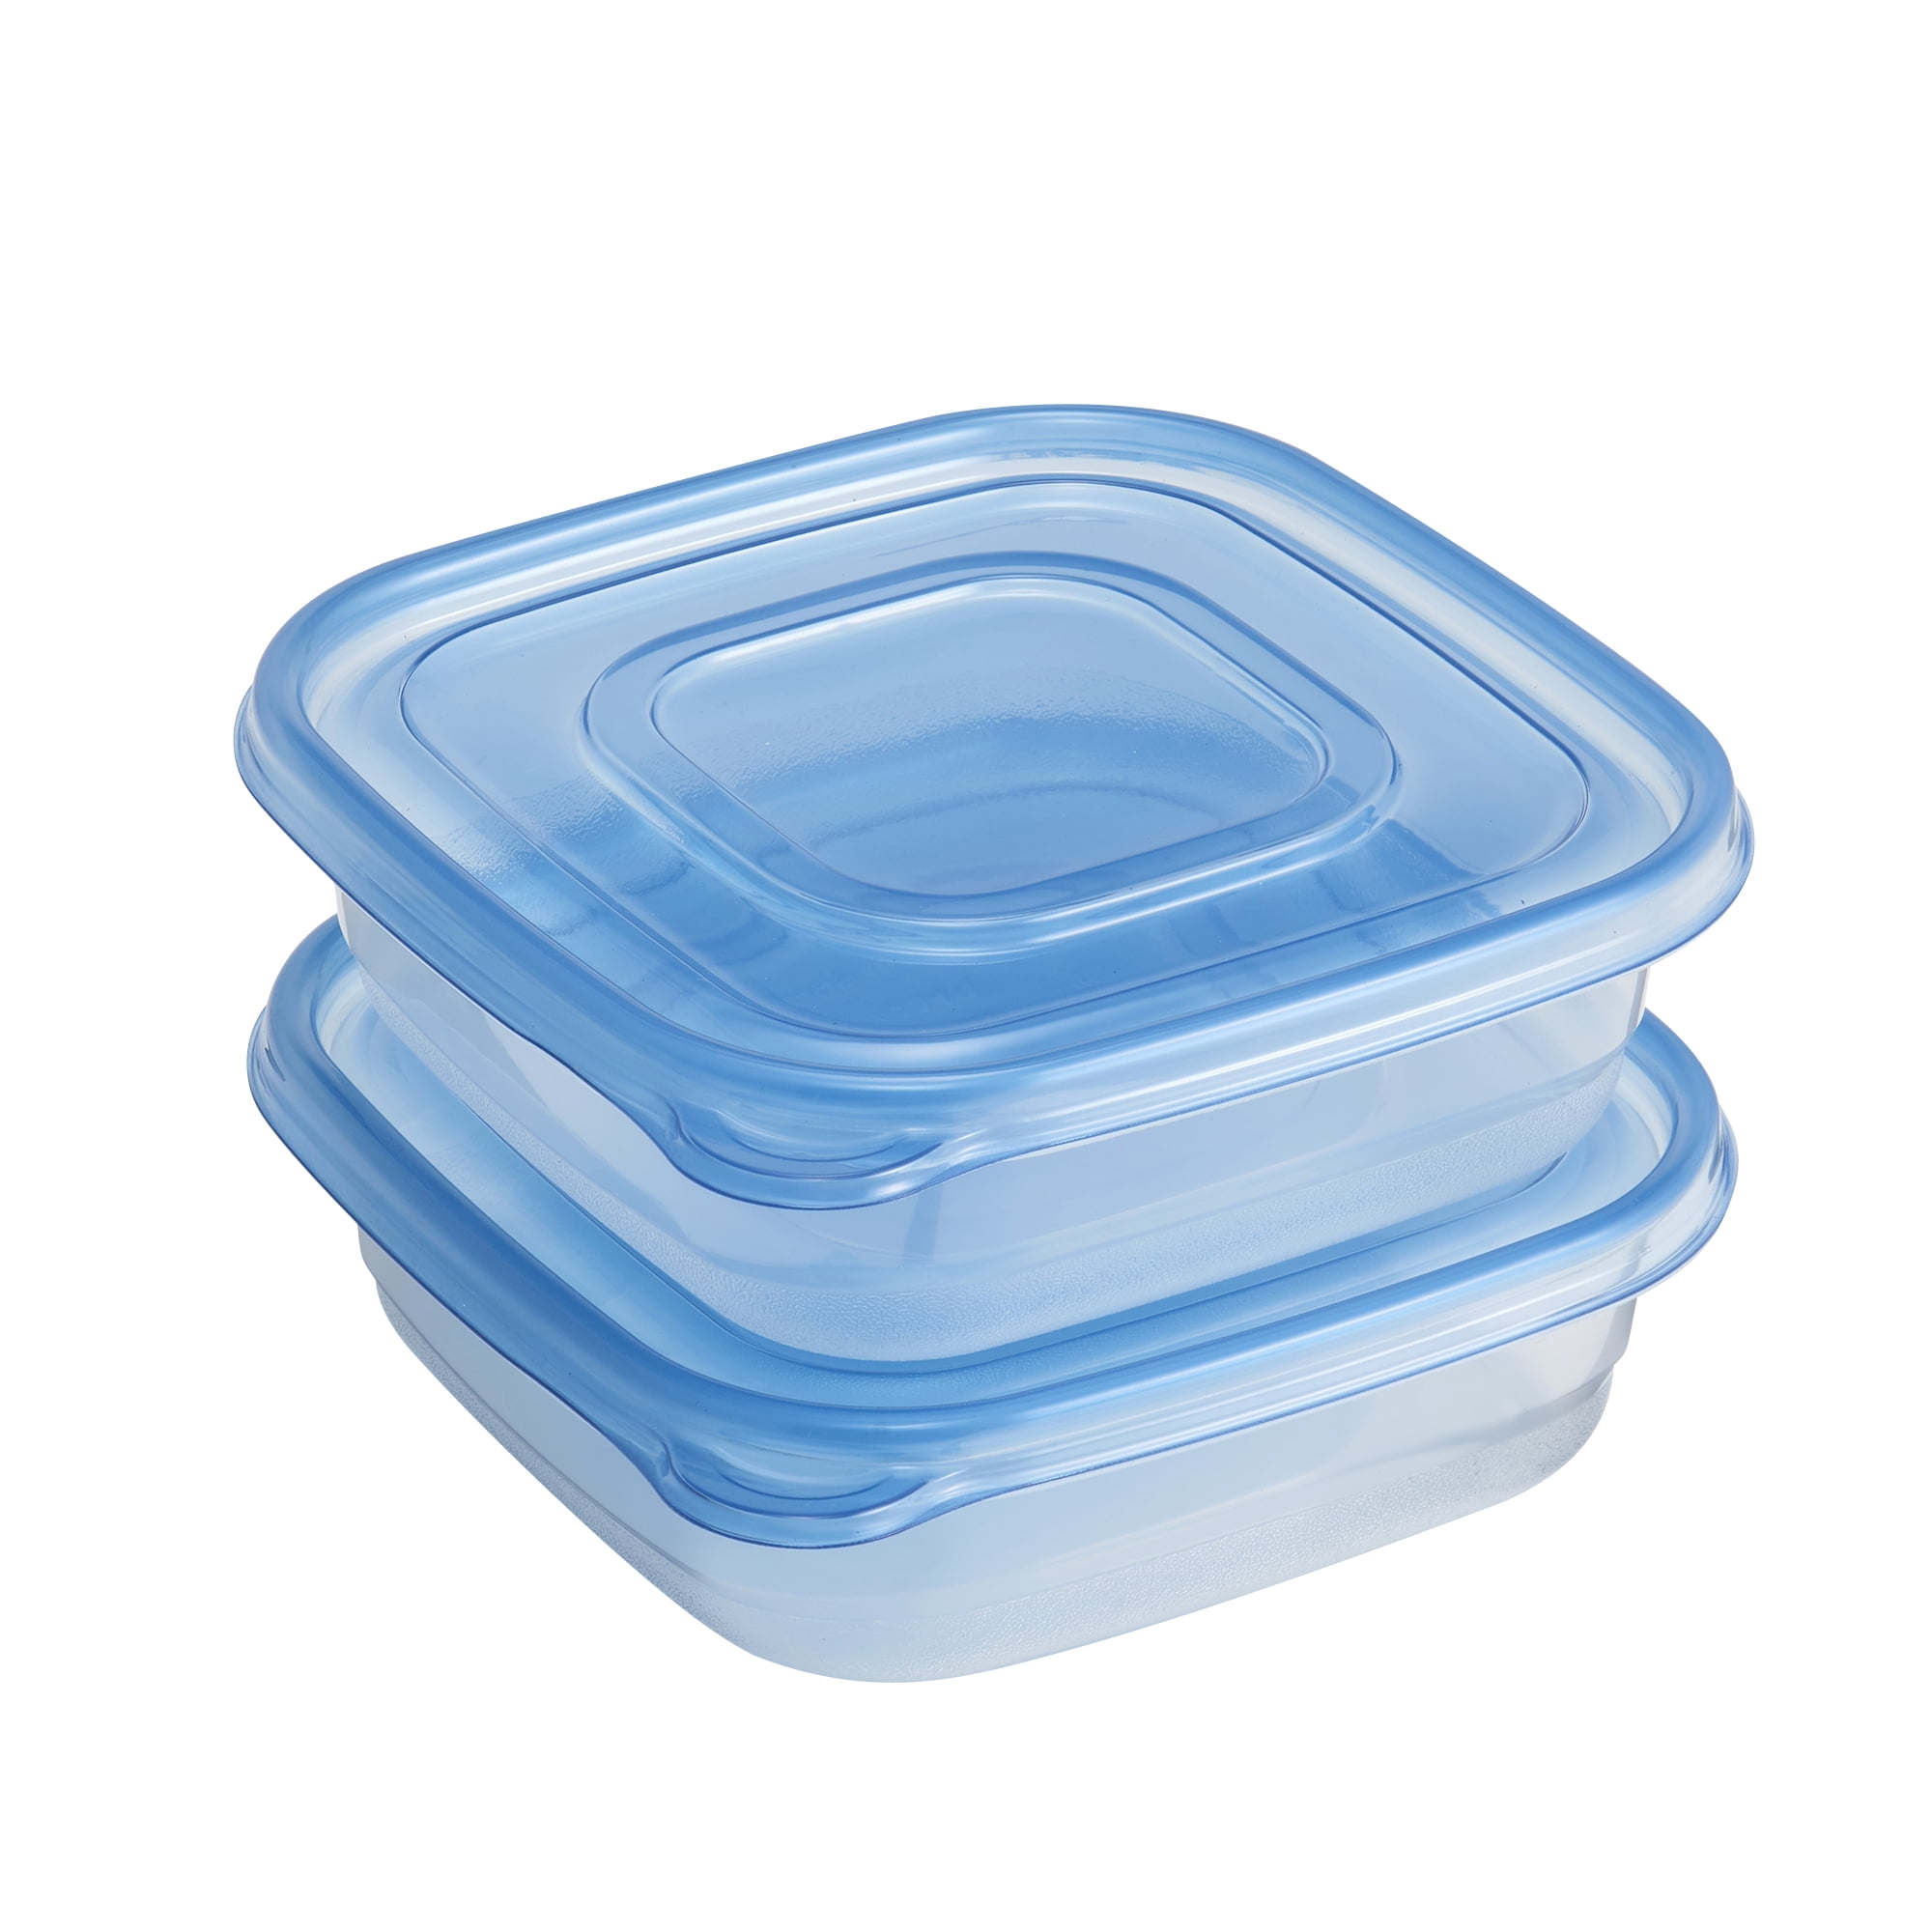 Mainstays 3.8 Cup Plastic Square Food Storage Container, Set of 2